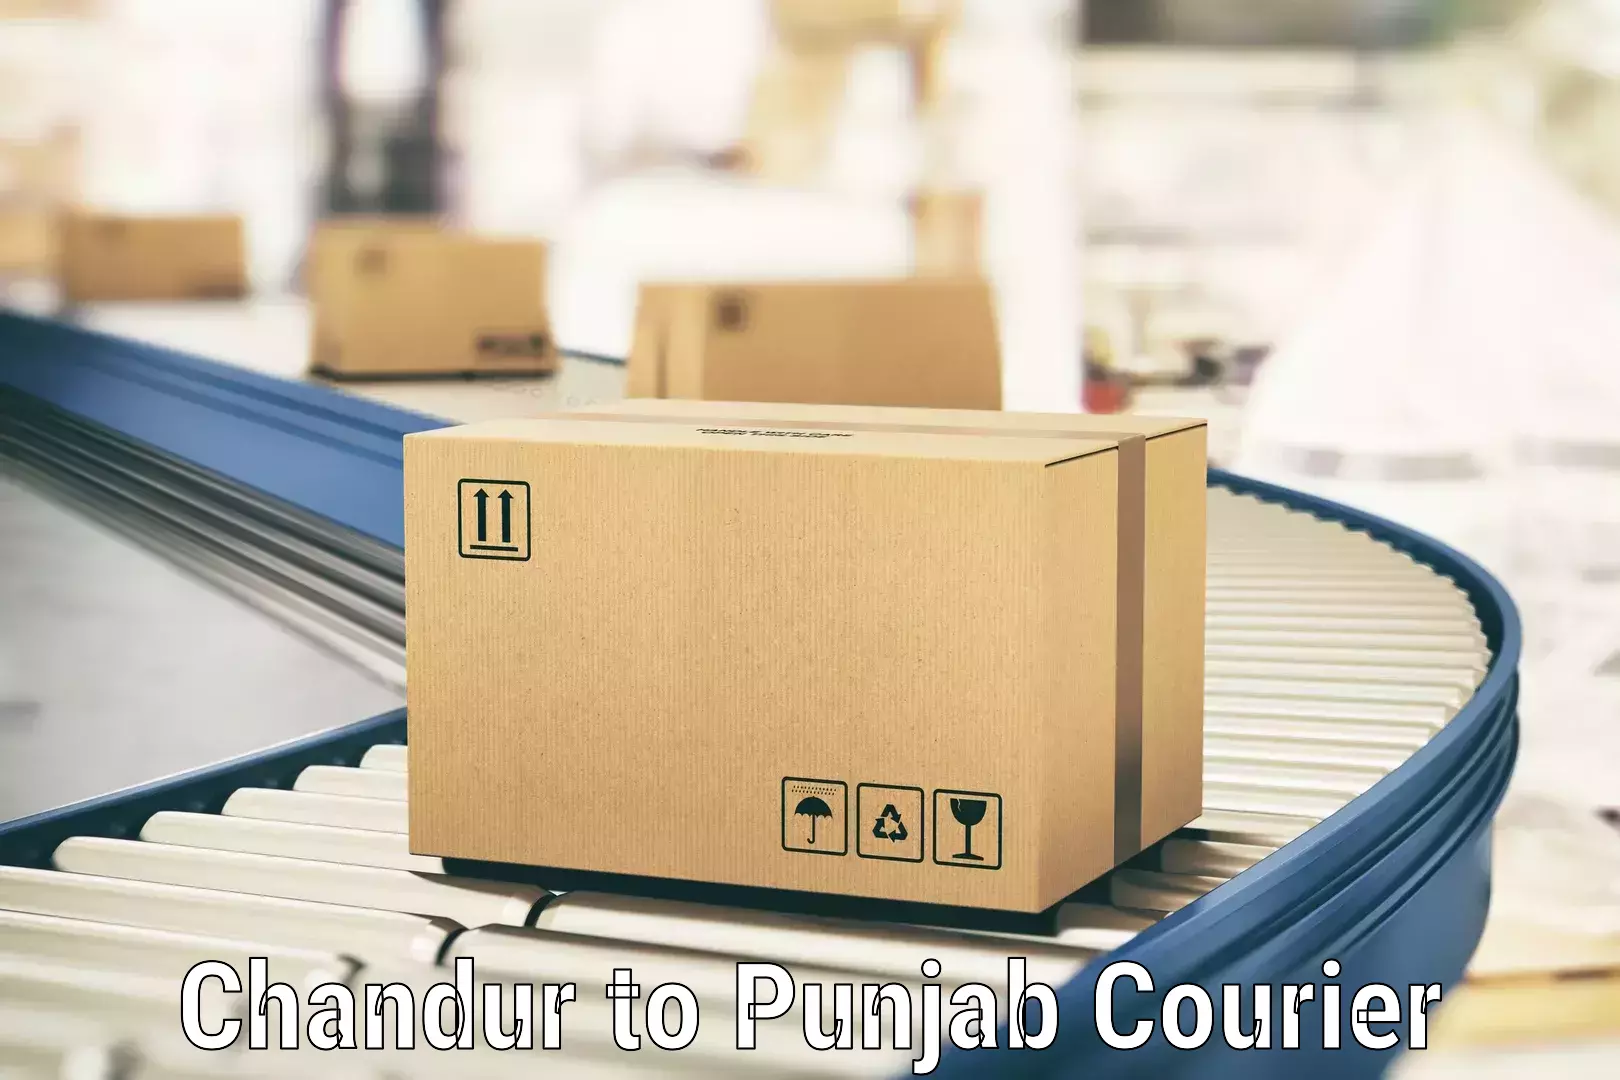 Heavy parcel delivery in Chandur to Firozpur